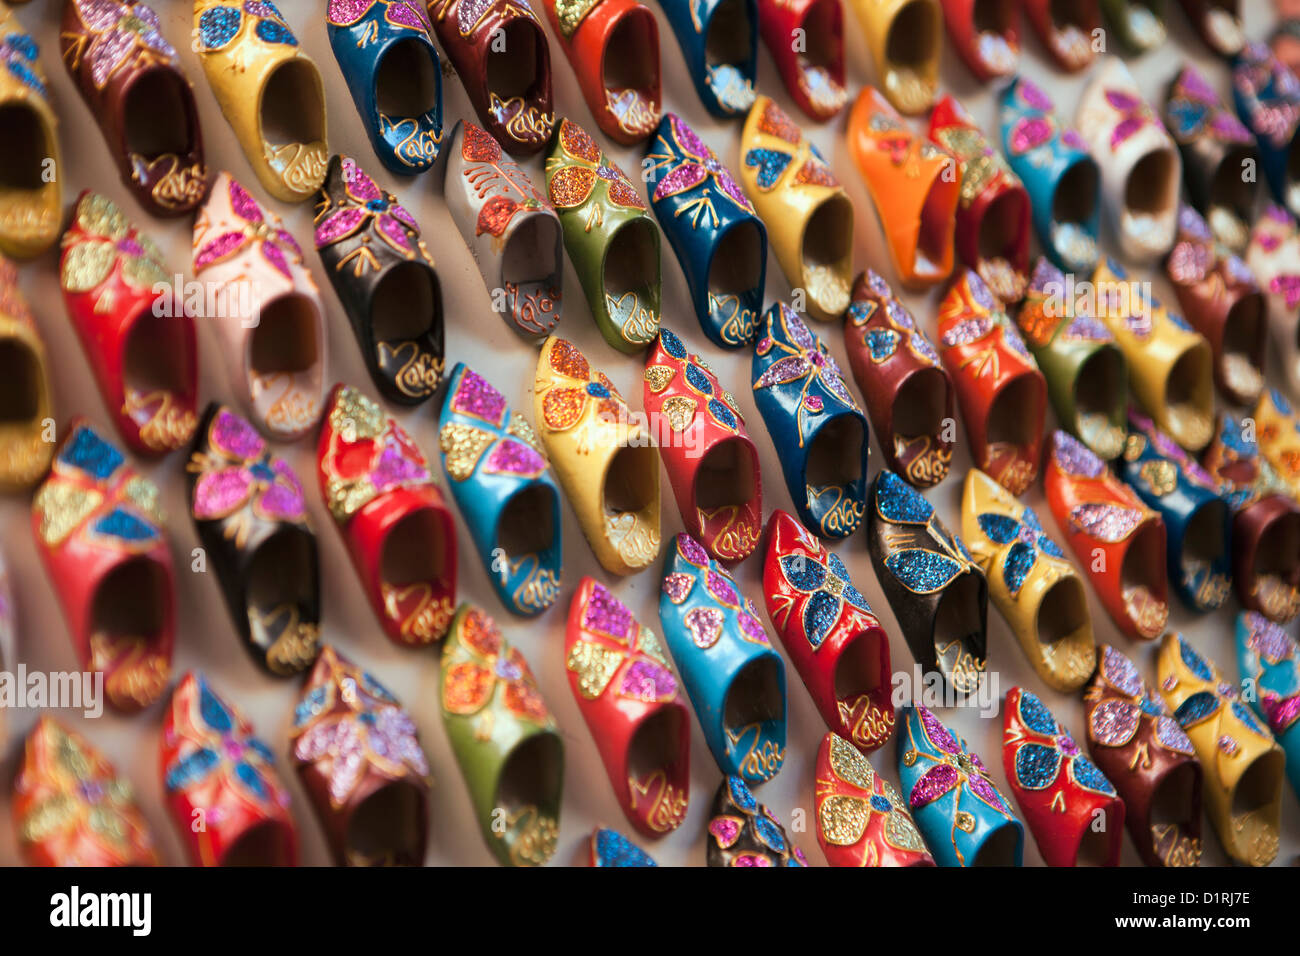 Morocco, Marrakech, Market. Small mules or babouches for sale. Stock Photo